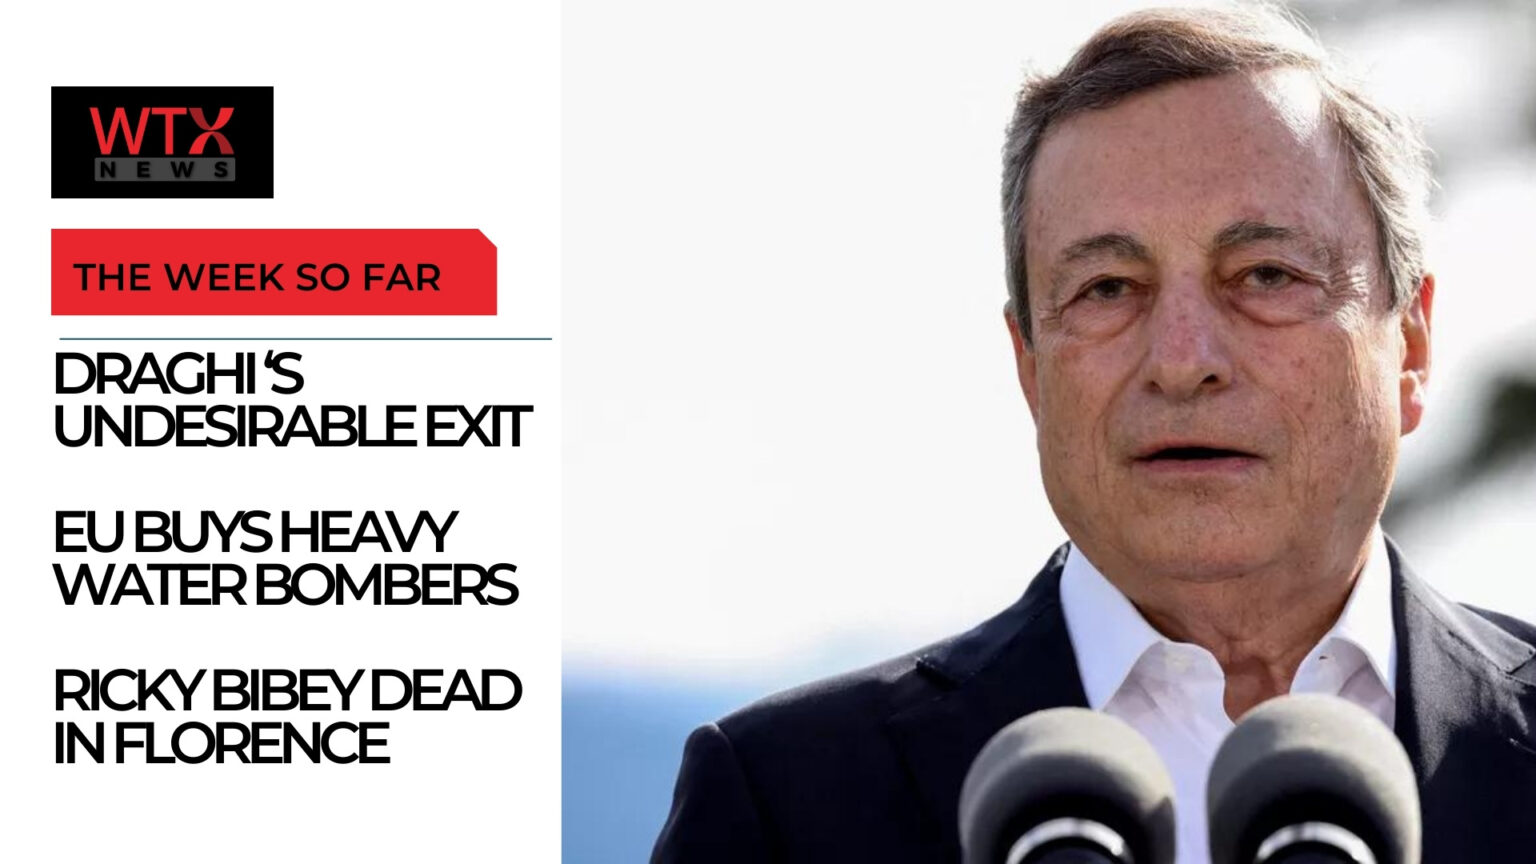 The Euro week so far: Draghi’s Undesirable Exit & the EU buys heavy water bombers